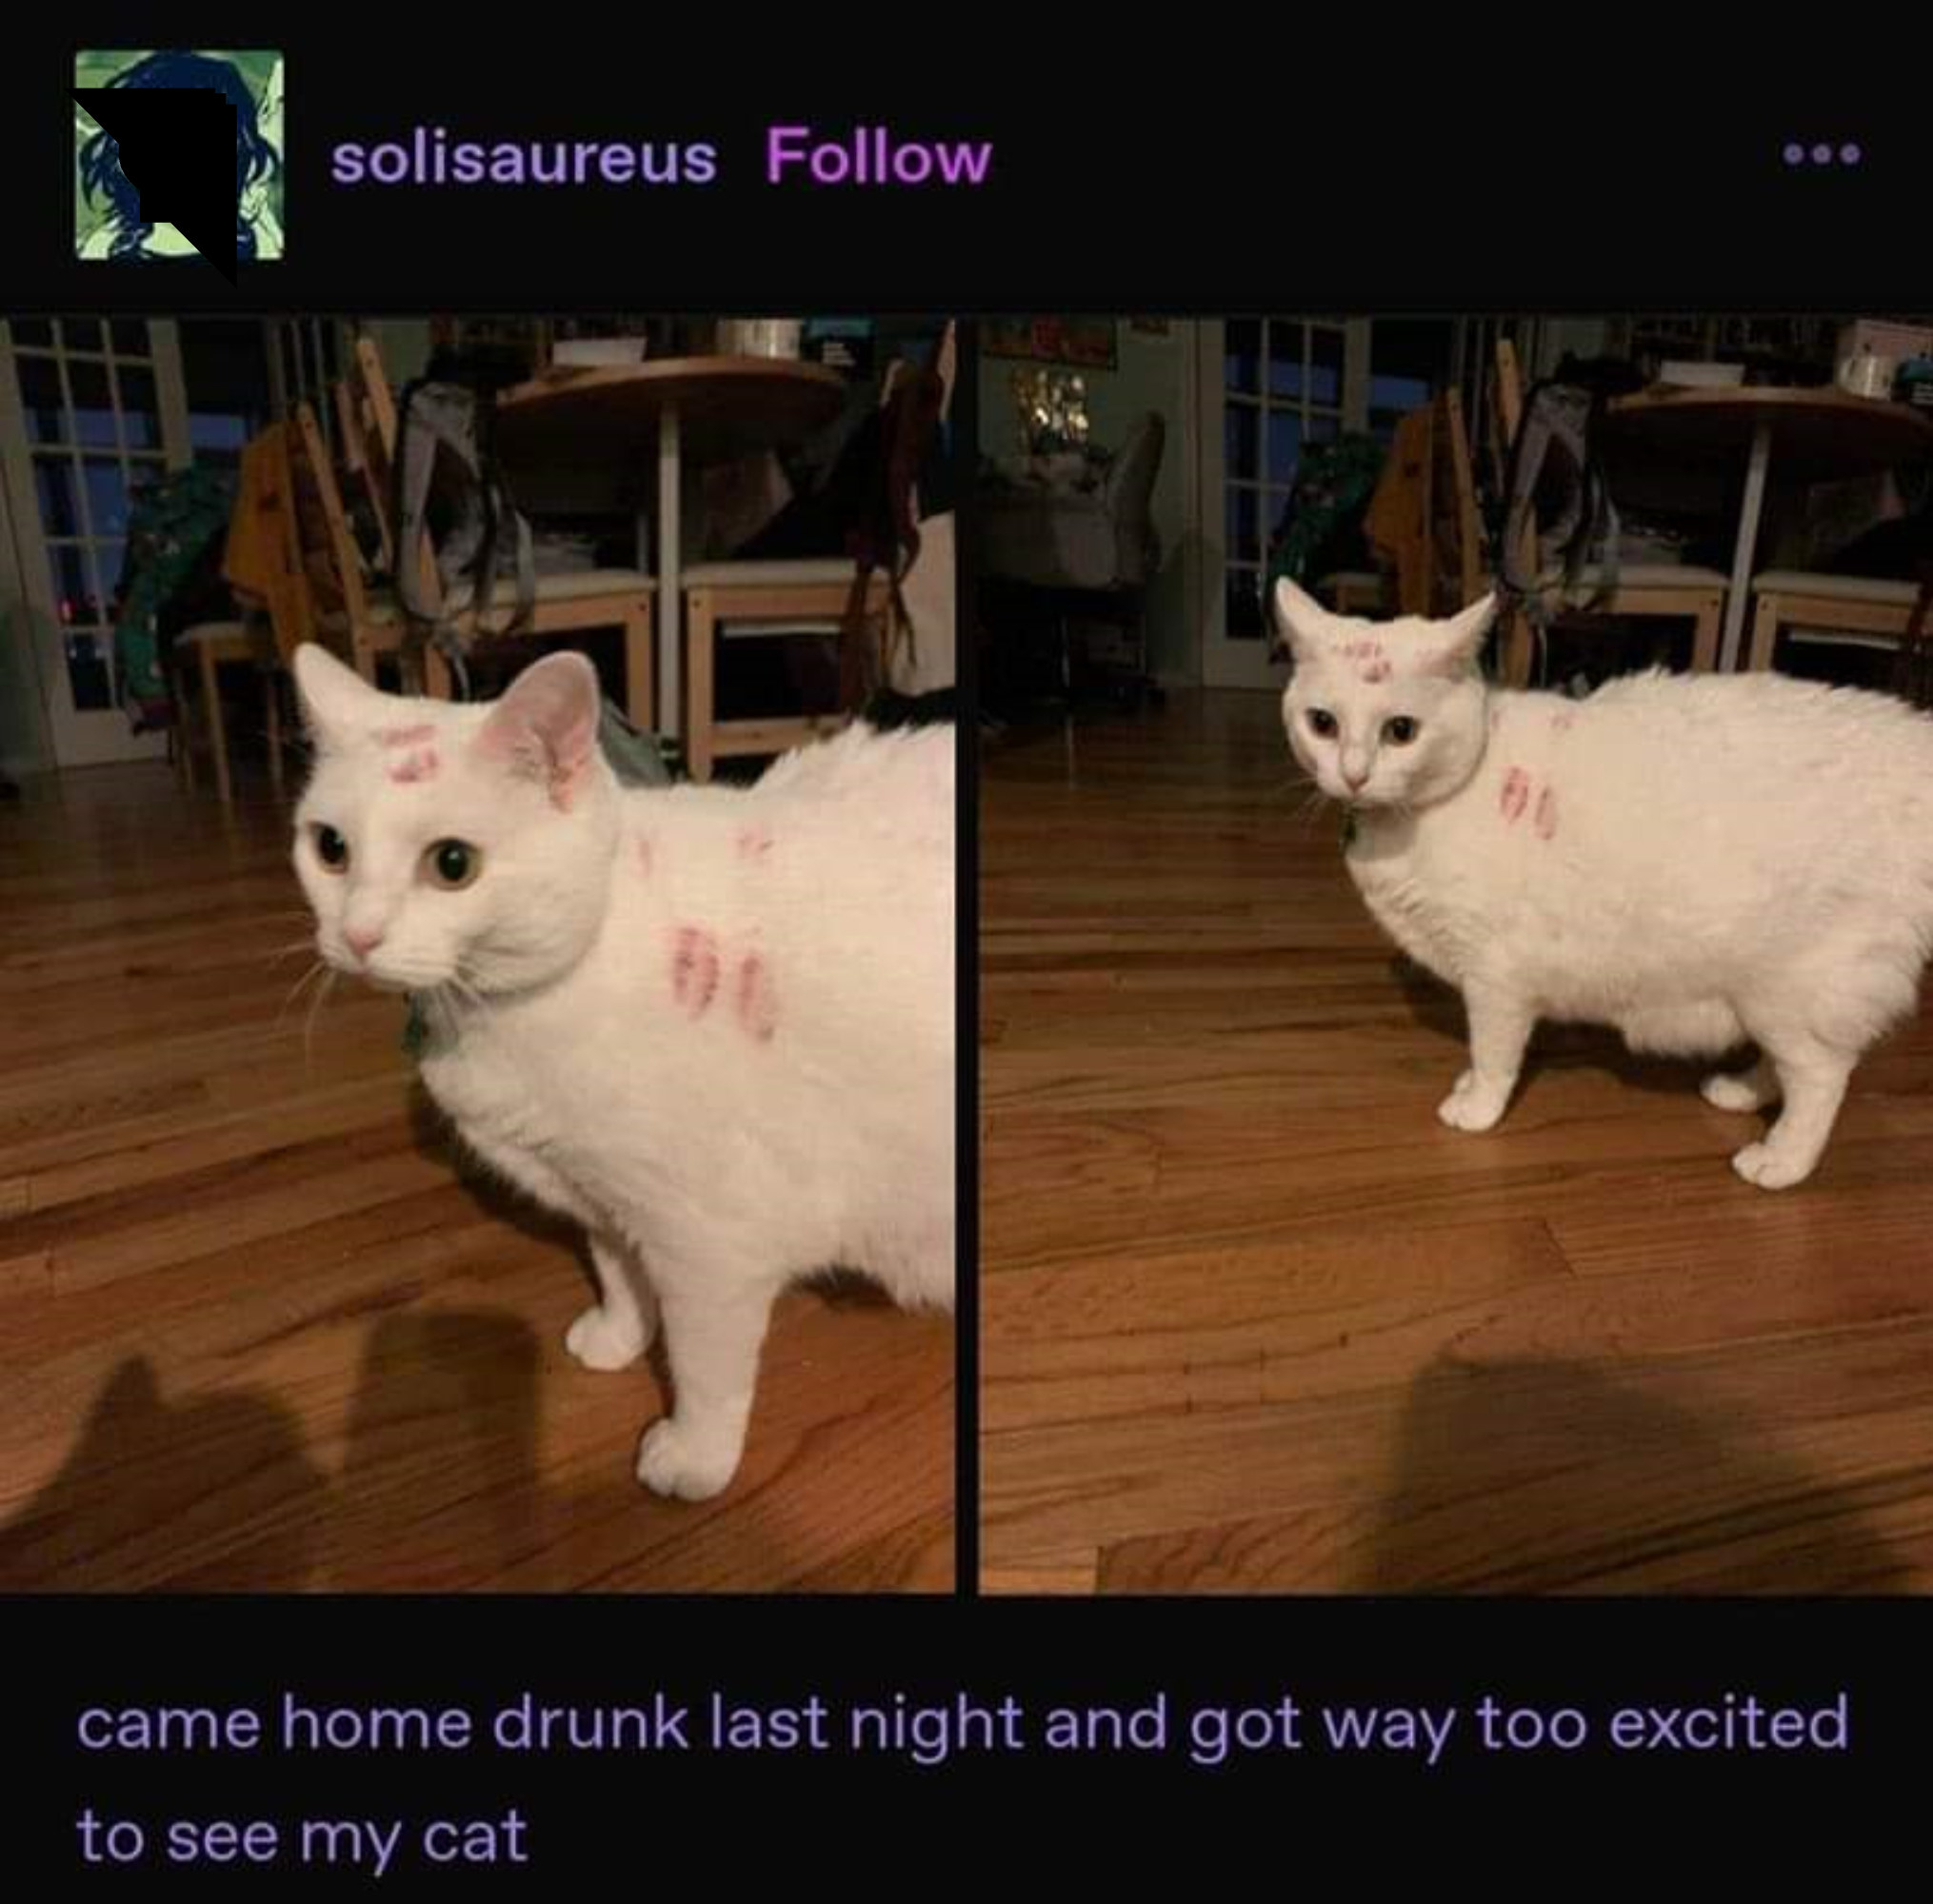 White cat with lipstick marks on its fur, with caption &quot;came home drunk last night and got way too excited to see my cat&quot;